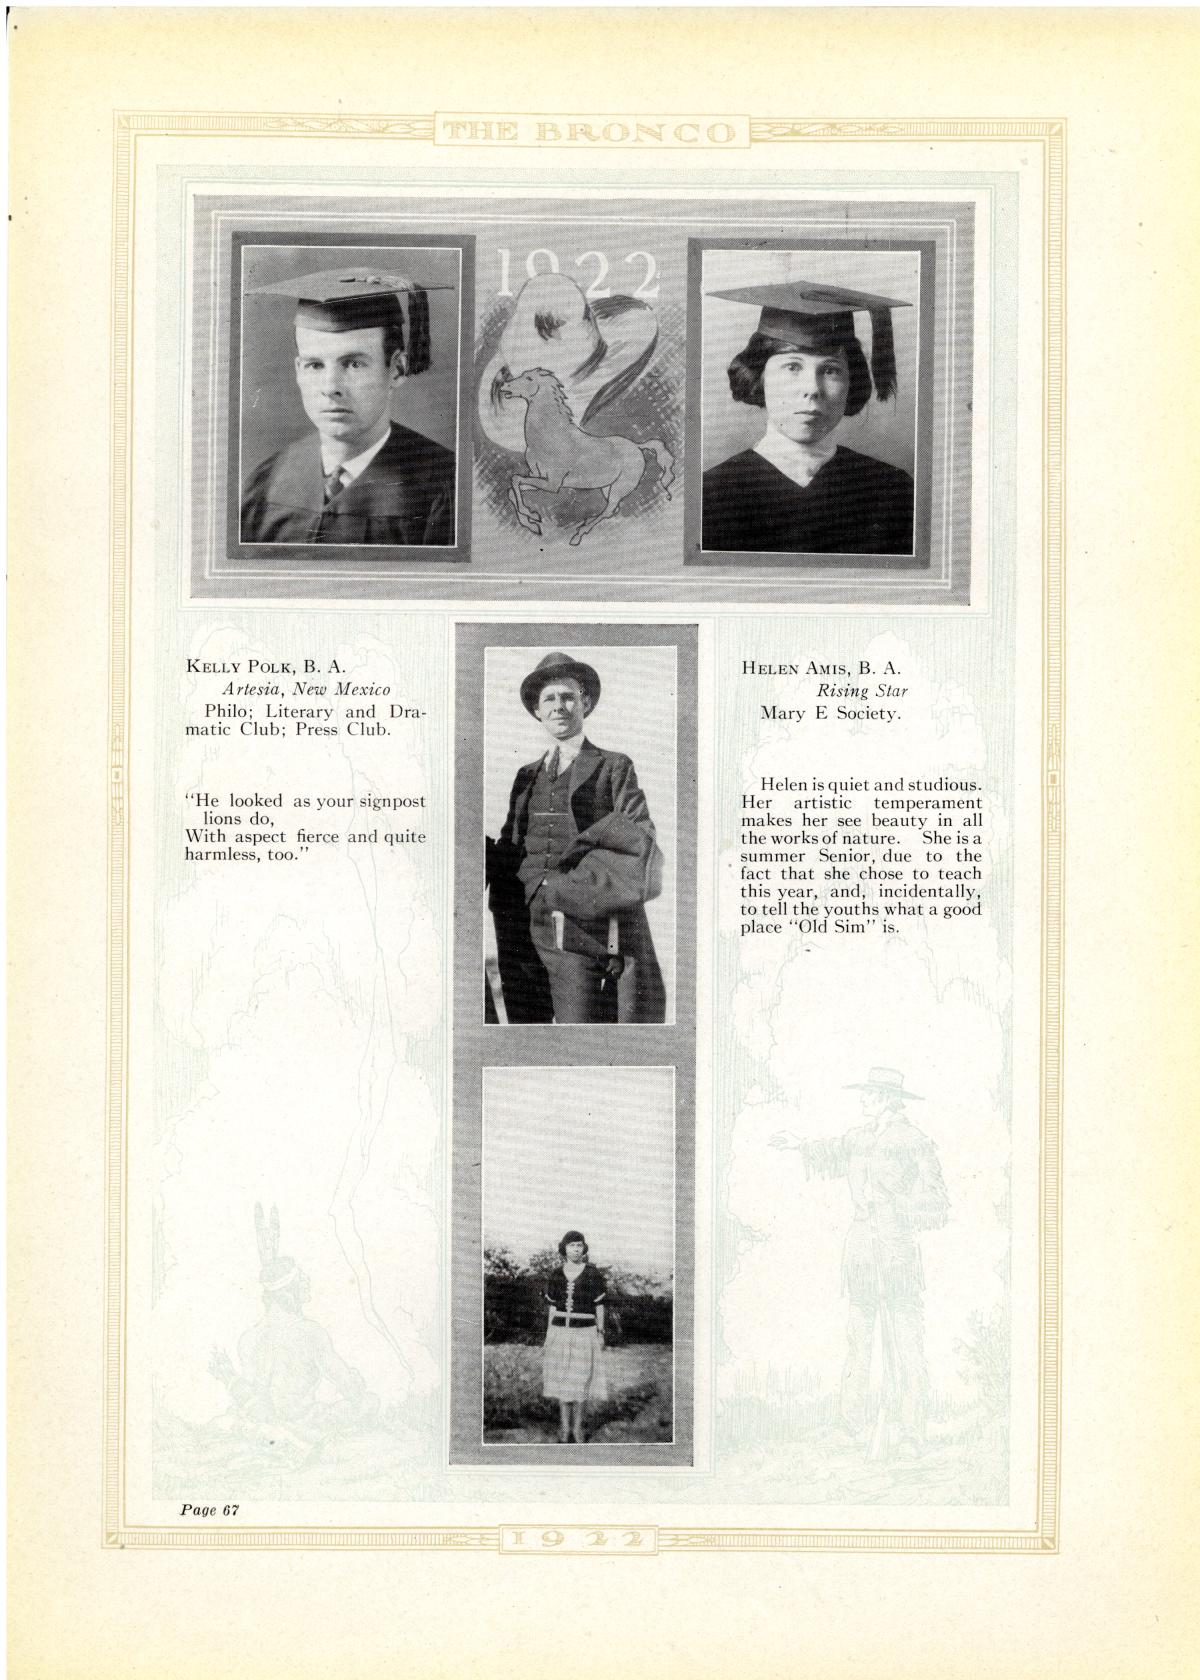 The Bronco, Yearbook of Simmons College, 1922
                                                
                                                    67
                                                